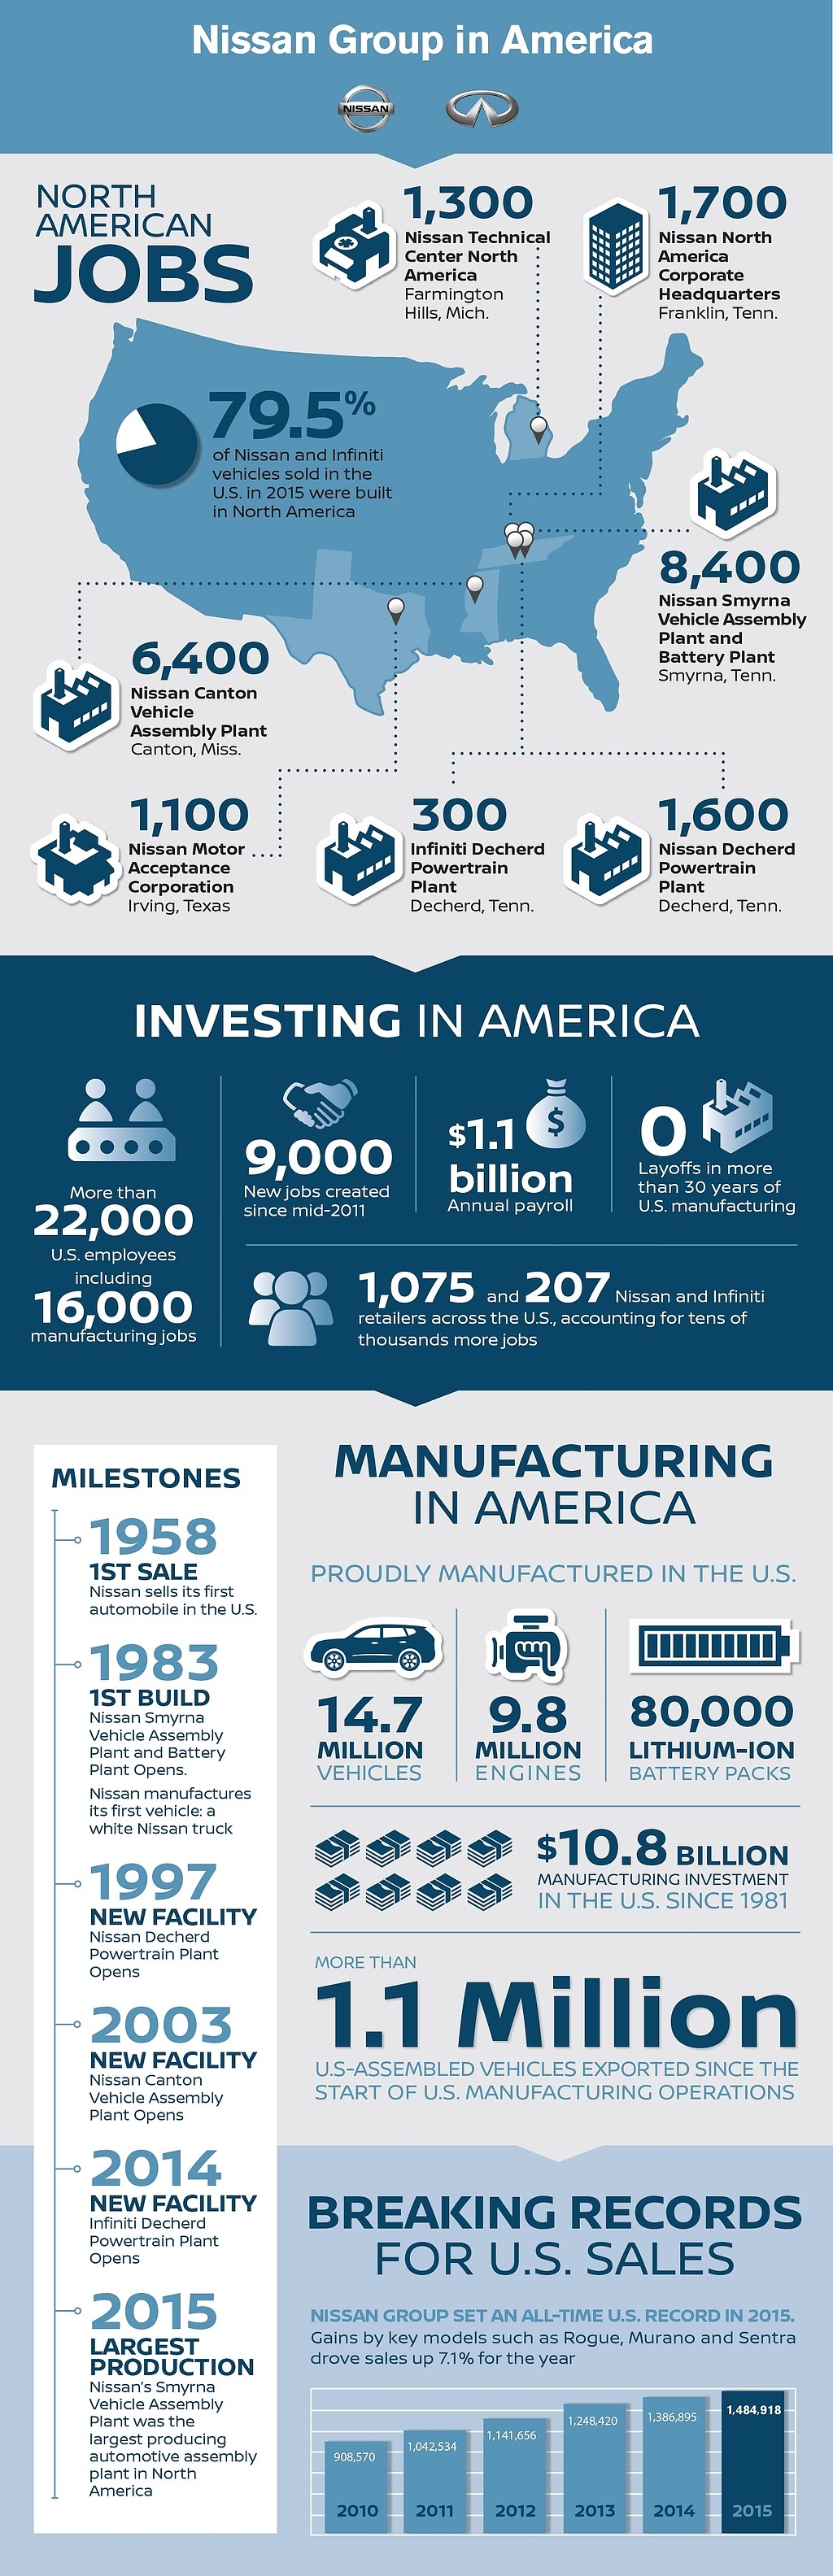 In recent years, Nissan has made strategic investments in its U.S. operations to ensure the company is able to continue to build quality vehicles that meet the growing needs of U.S. consumers. In 2015, Nissan marked a number of key U.S. milestones, including all-time records for total sales (1,484,918) and production (962,373). Localization remains an important part of Nissan's strategy in North America, and the company has increased production of its core models in North America: Altima, Pathfinder, Sentra, Rogue, Versa, LEAF, Murano, Maxima and the next-generation TITAN.